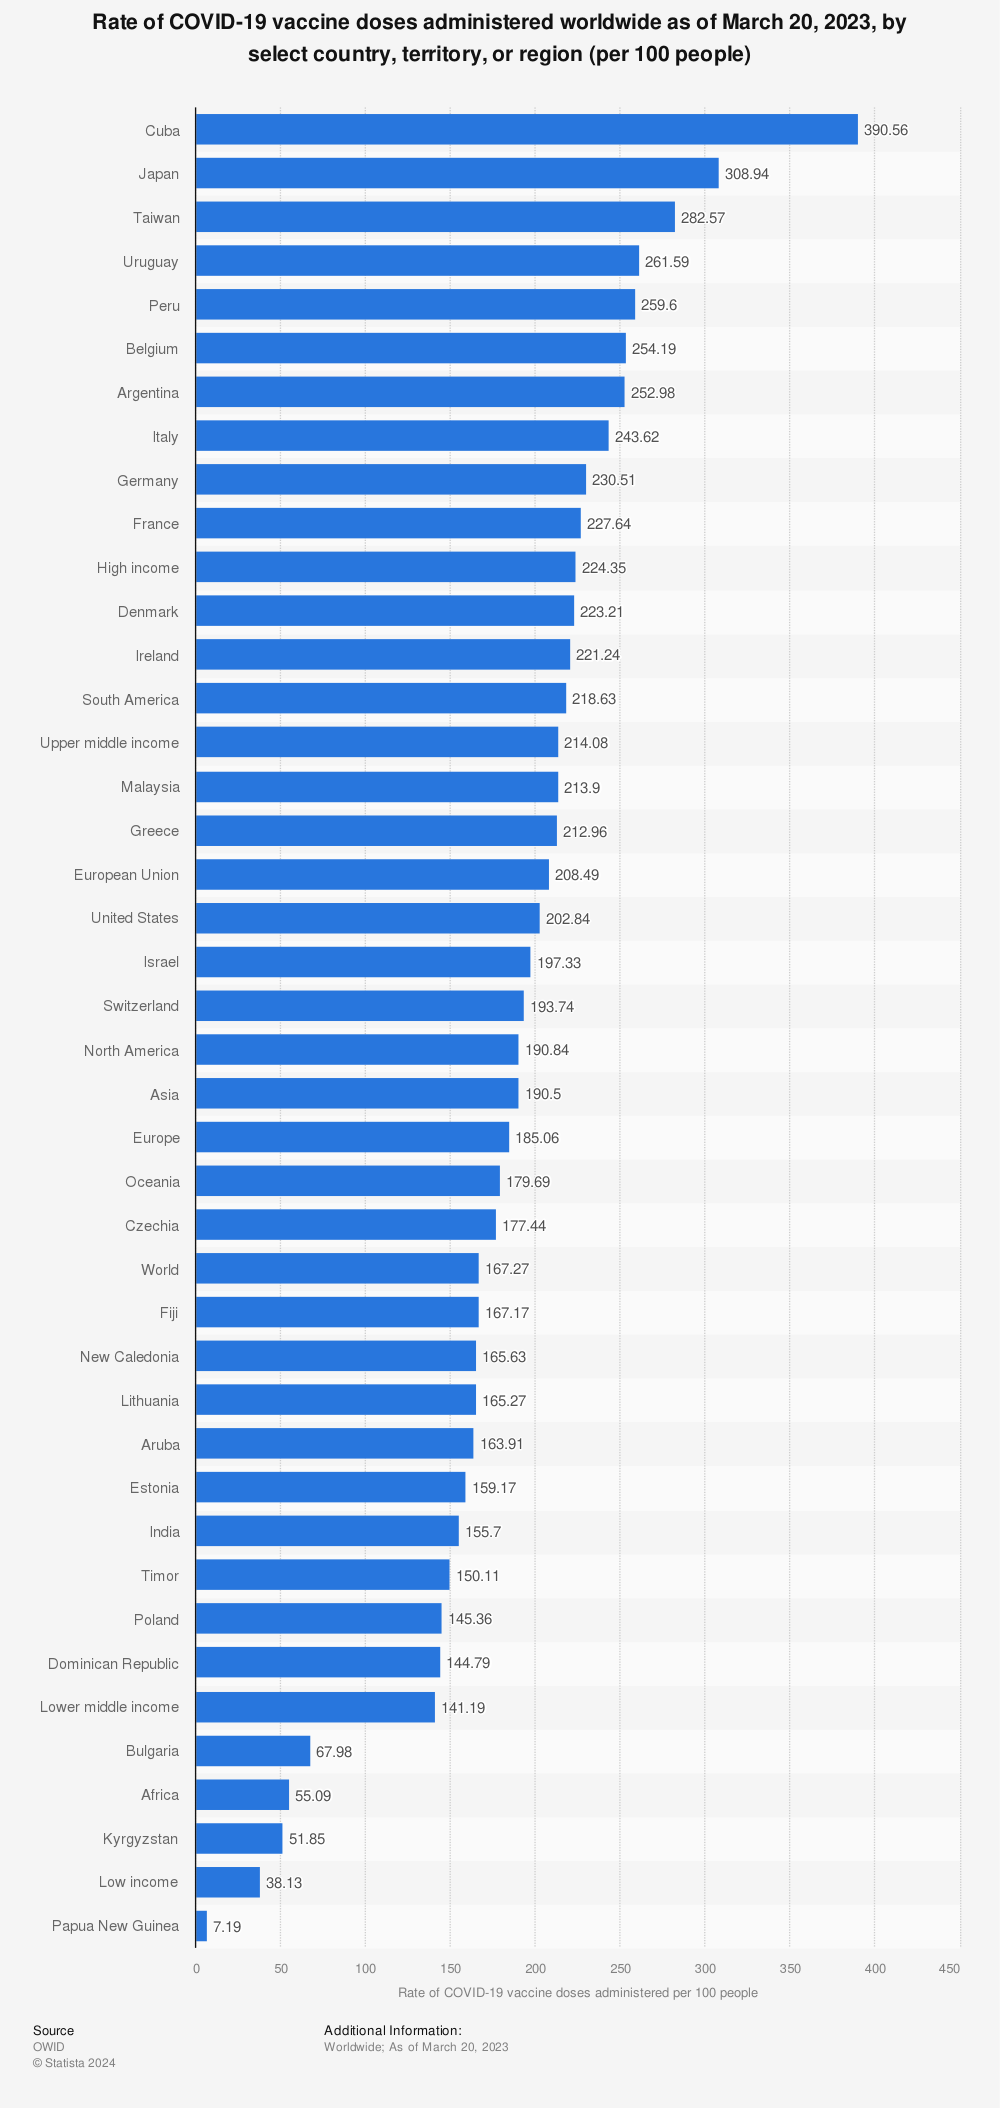 Statistic: Rate of COVID-19 vaccination worldwide as of April 19, 2021, by country or territory* (per 100 people) | Statista